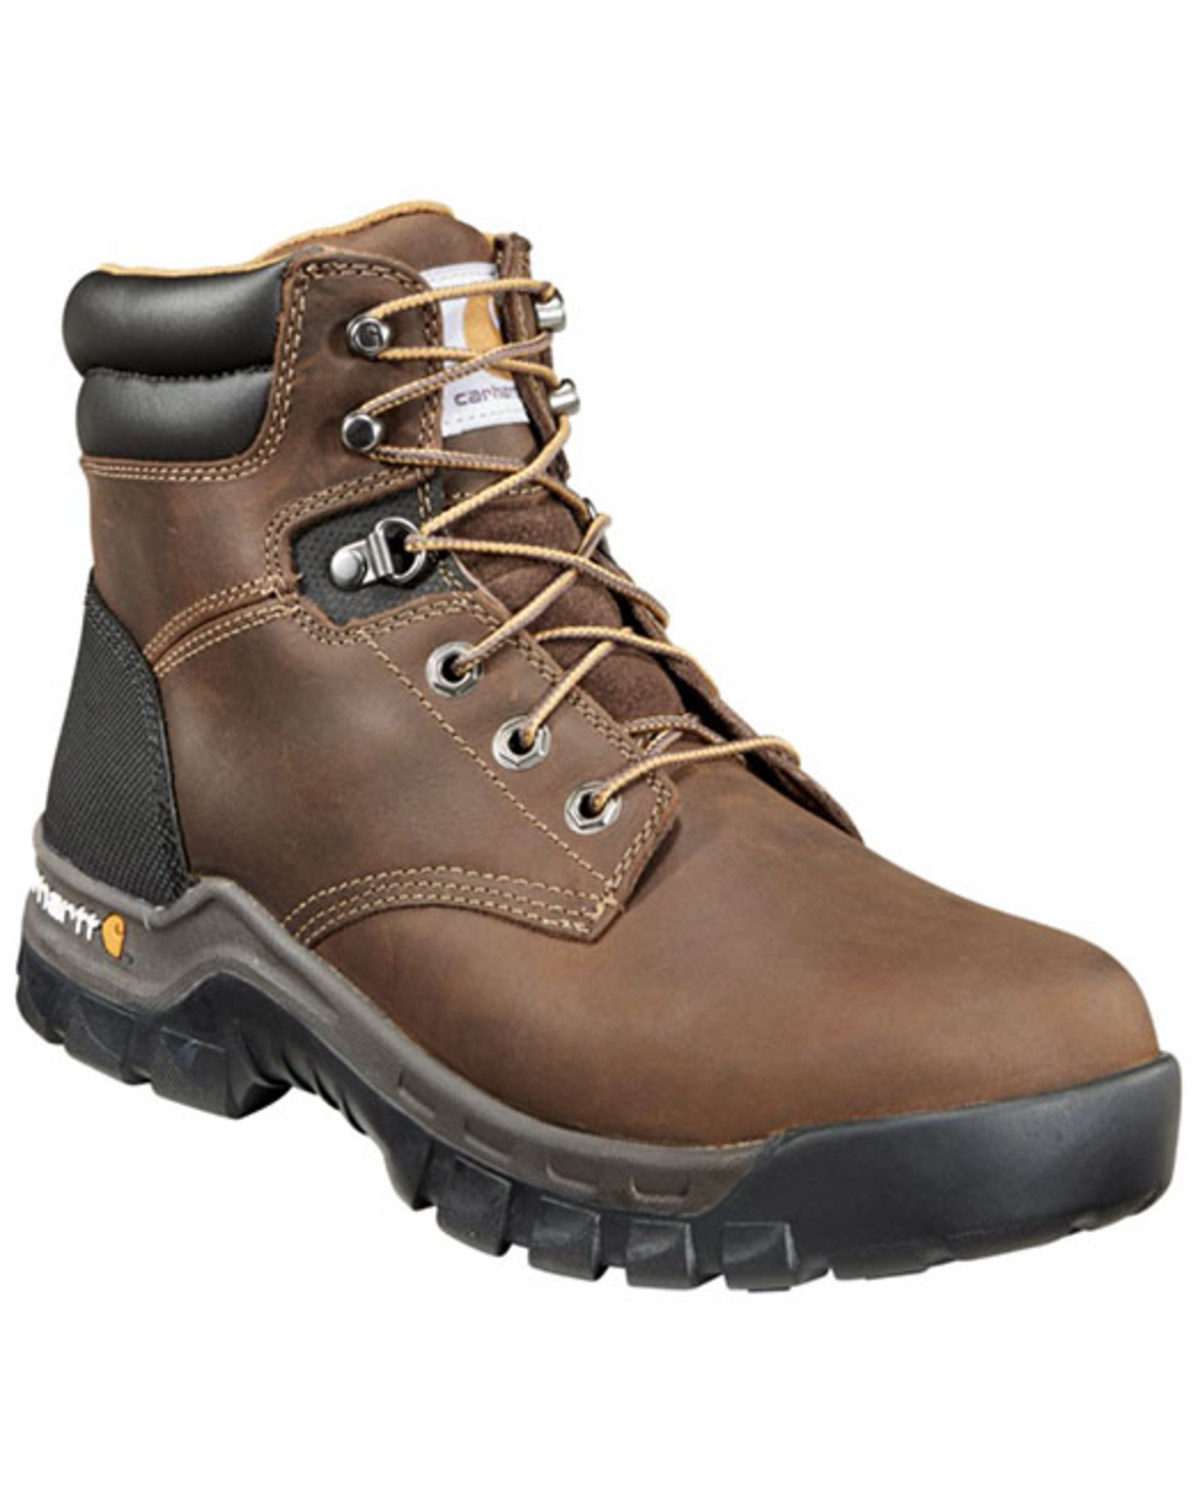 Carhartt Men's Rugged Flex 6" Lace-Up EH Work Boots - Round Toe